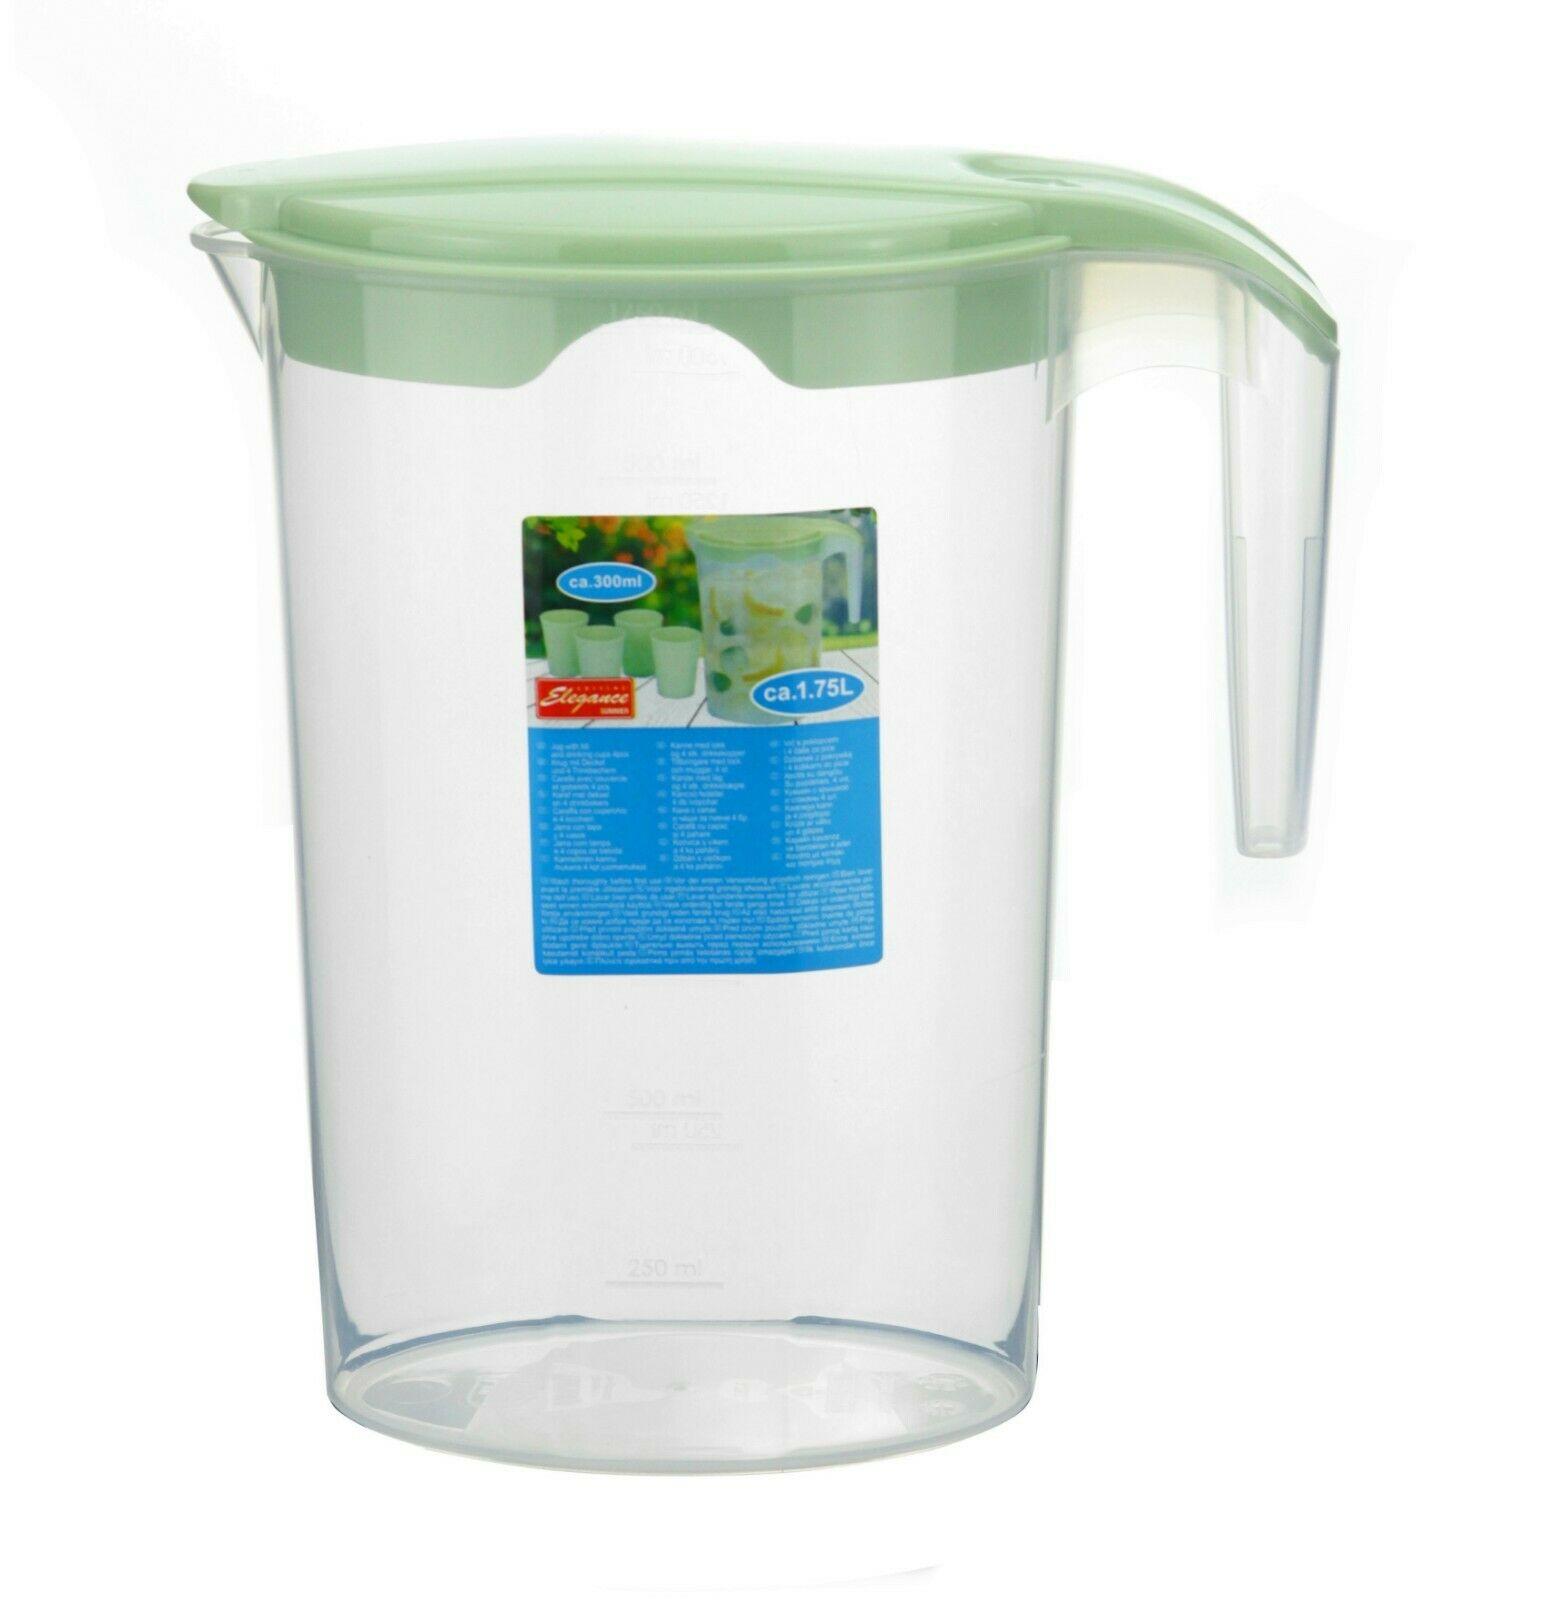 Iced Tea and Cold&Hot Water Water Jug with Lids Elegear Plastic Jugs with 4 Cups 1.6 L Fridge Jug Perfect for Fruit Juice Green 